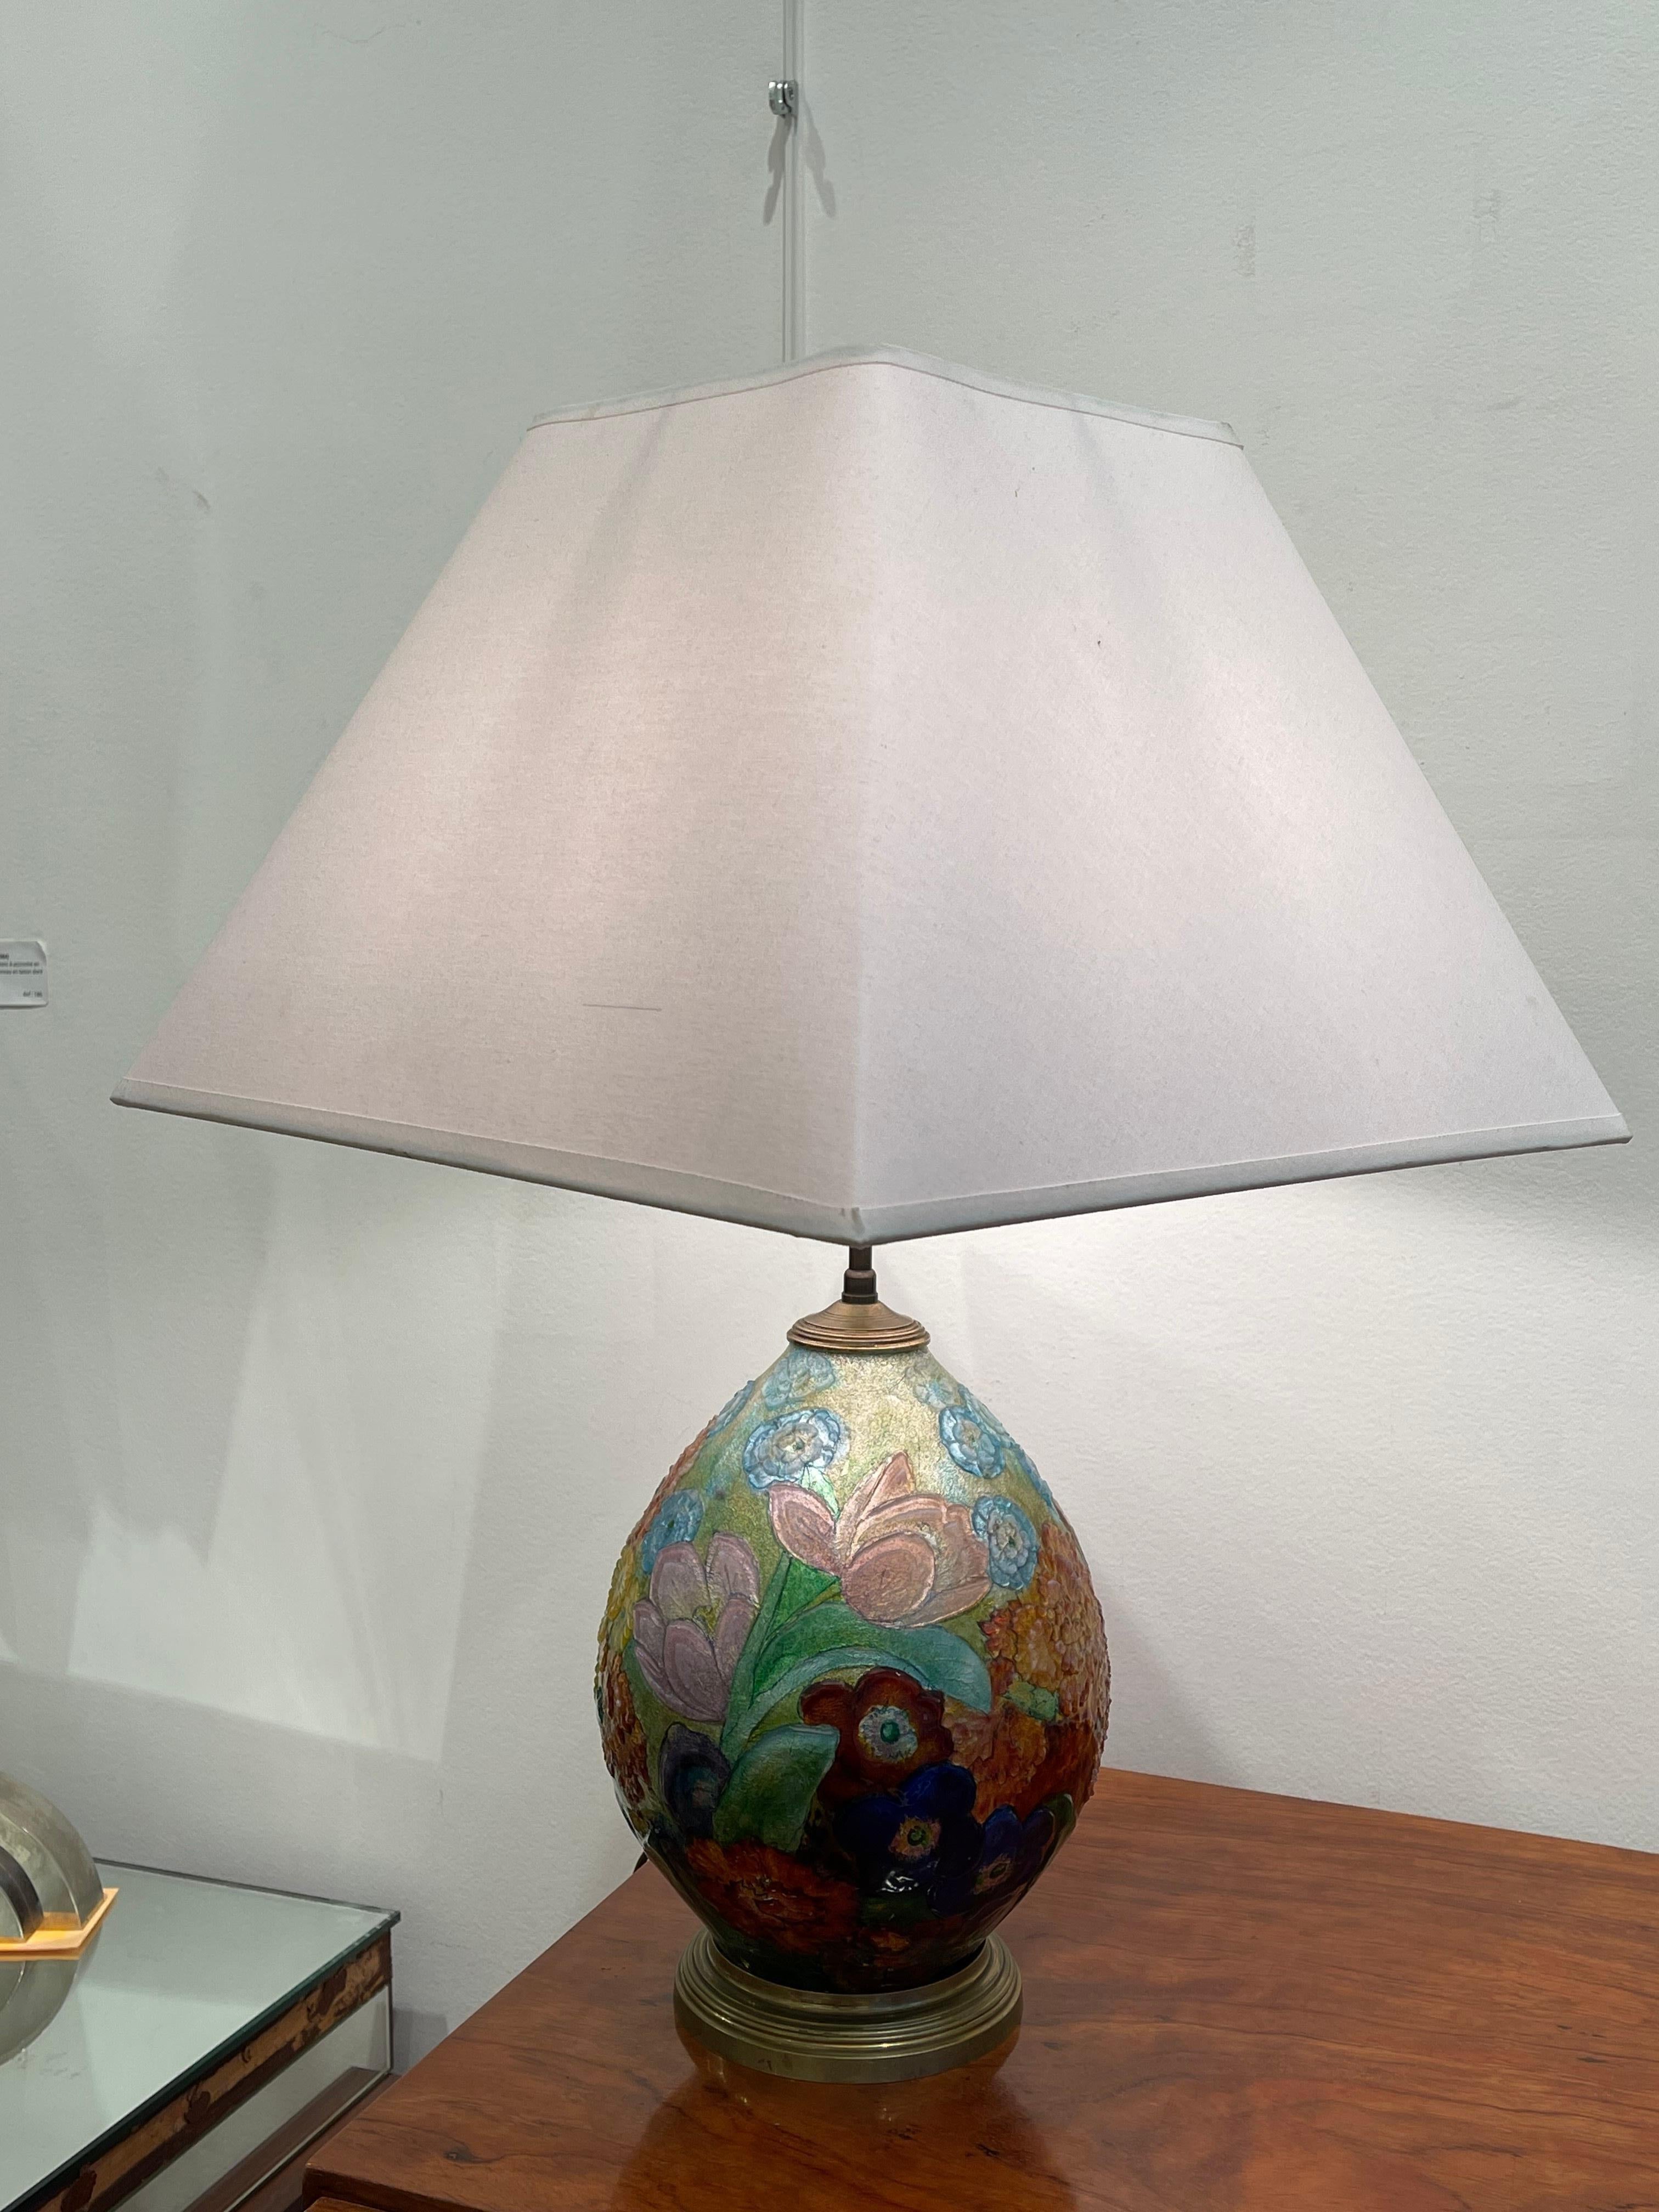 Exceptional table lamp by Camille Fauré(1874-1956) whose workshop was in Limoges (France). It has the shape of an egg made of copper fully covered with polychromic and translucent enamel representing flowers. The quality of the enamel is outstanding